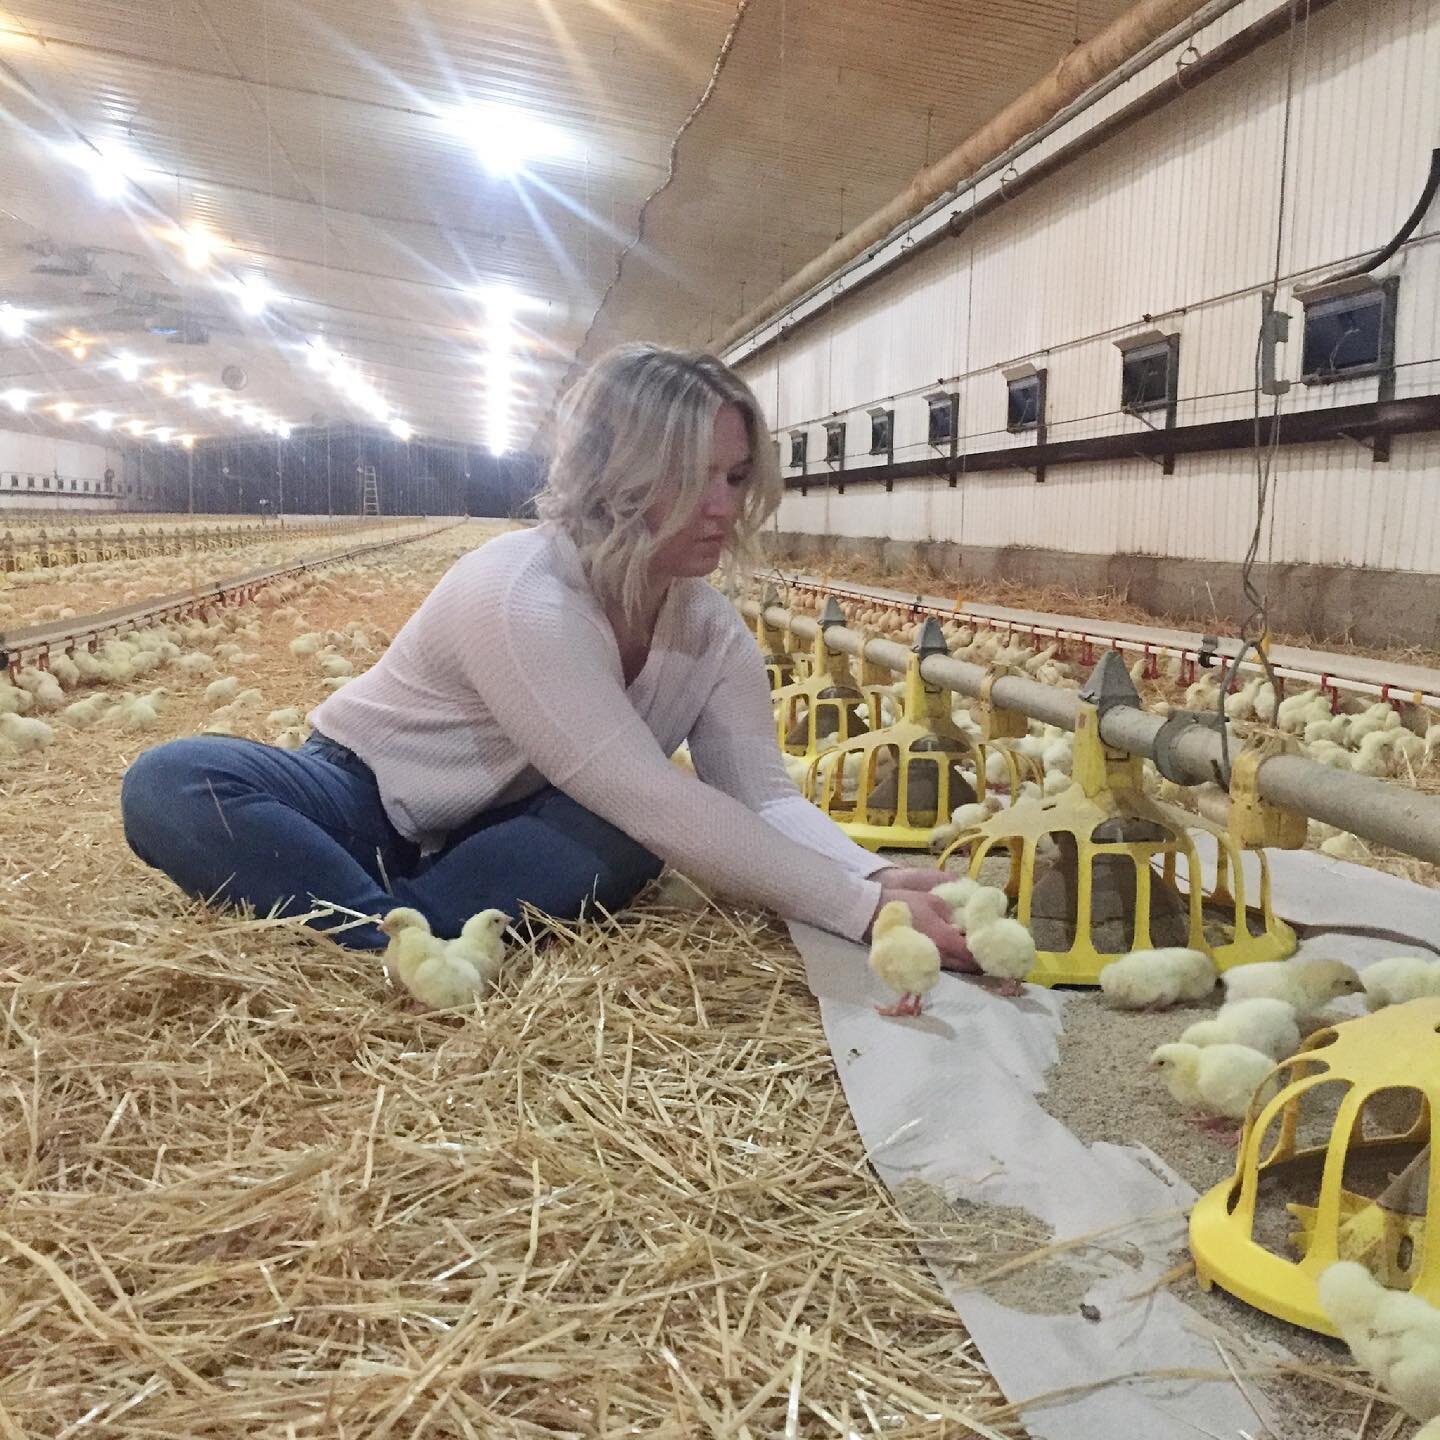 We deserve to know where our food comes from! We are 1 of 68 broiler chicken farms in Saskatchewan.  We work hard to provide some of the best quality chicken for our communities that is as fresh as possible as well as affordable. 

I&rsquo;m offering